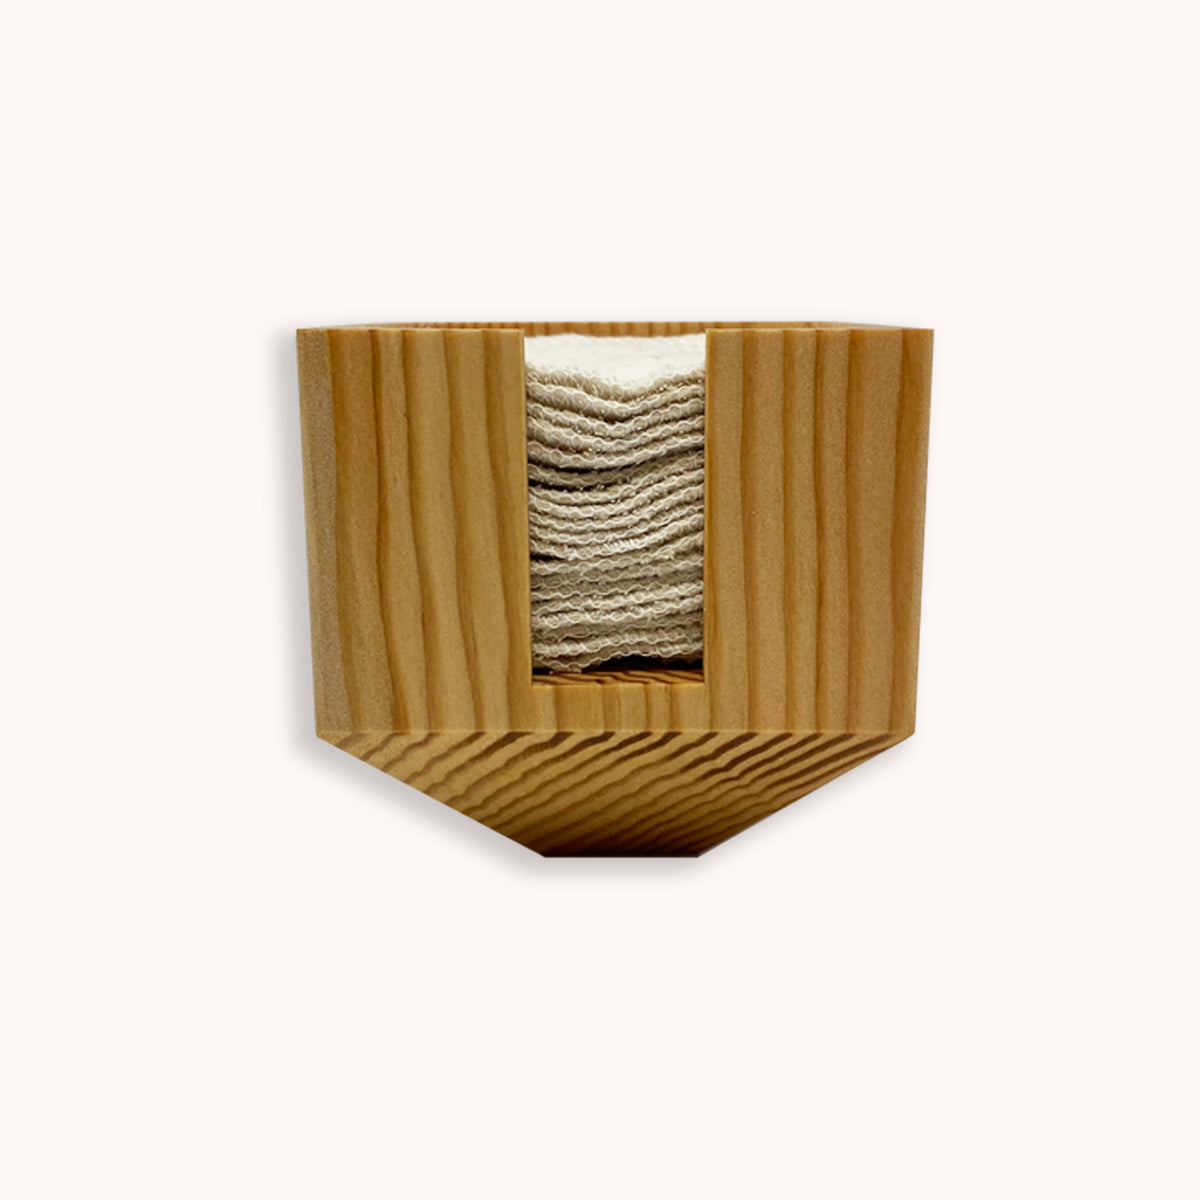 A stack of reusable cotton rounds stacked inside a bamboo storage container.